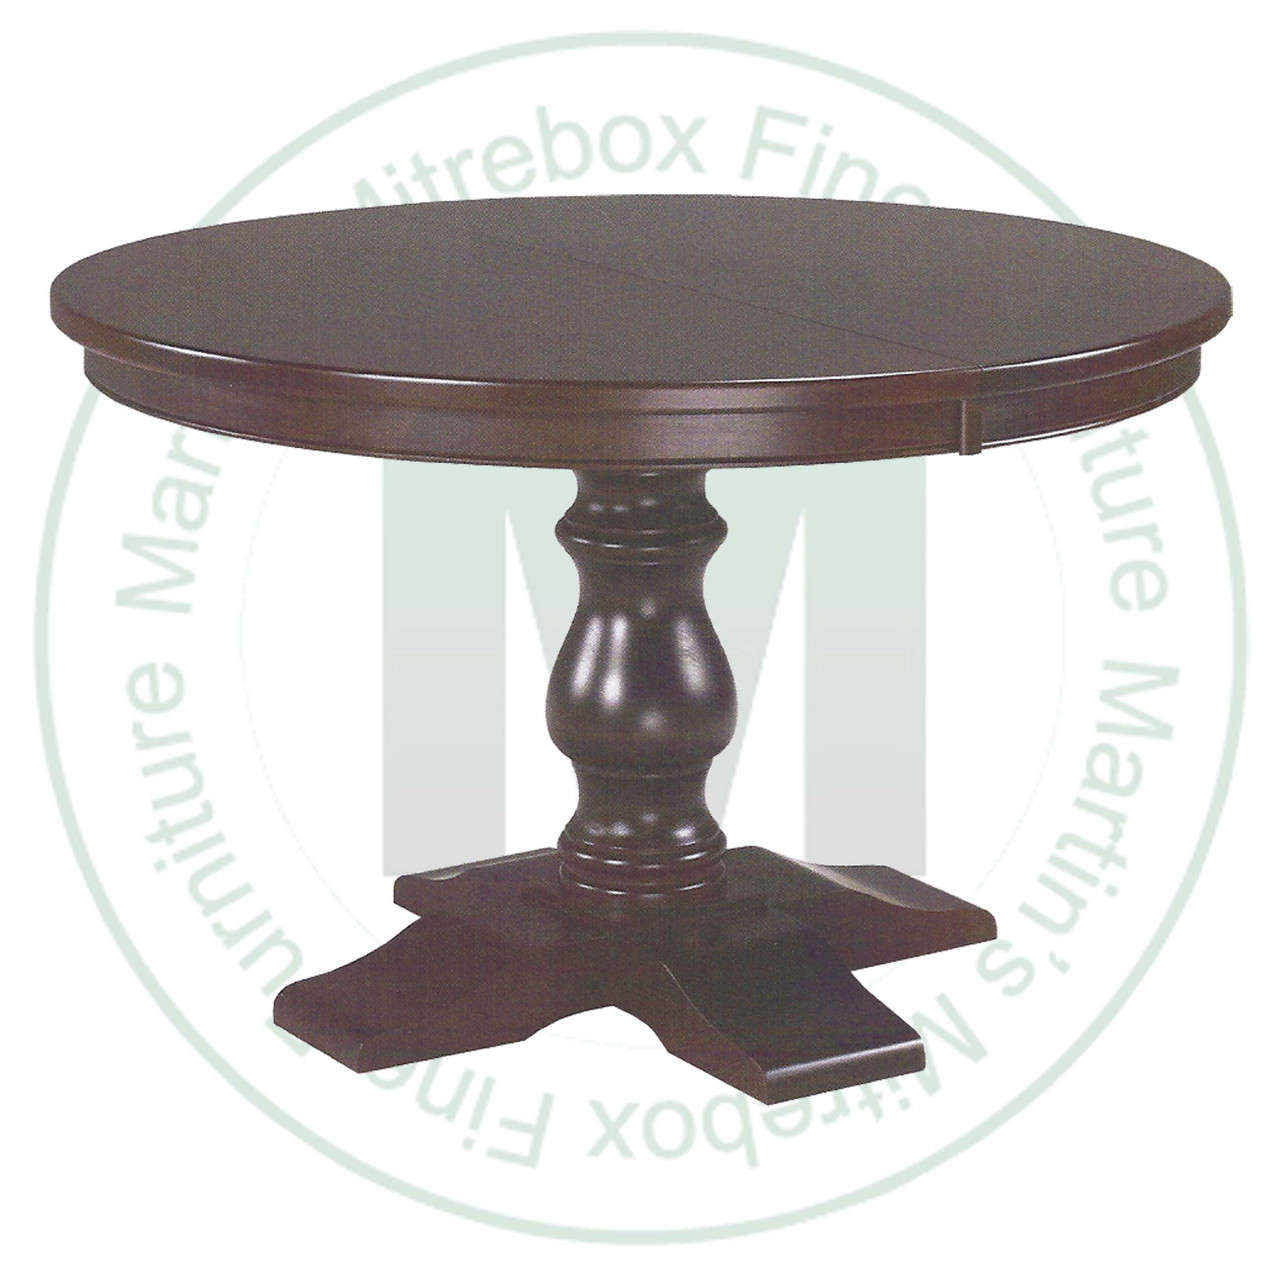 Wormy Maple Savannah Single Pedestal Table 42''D x 48''W x 30''H With 2 - 12'' Leaves Table